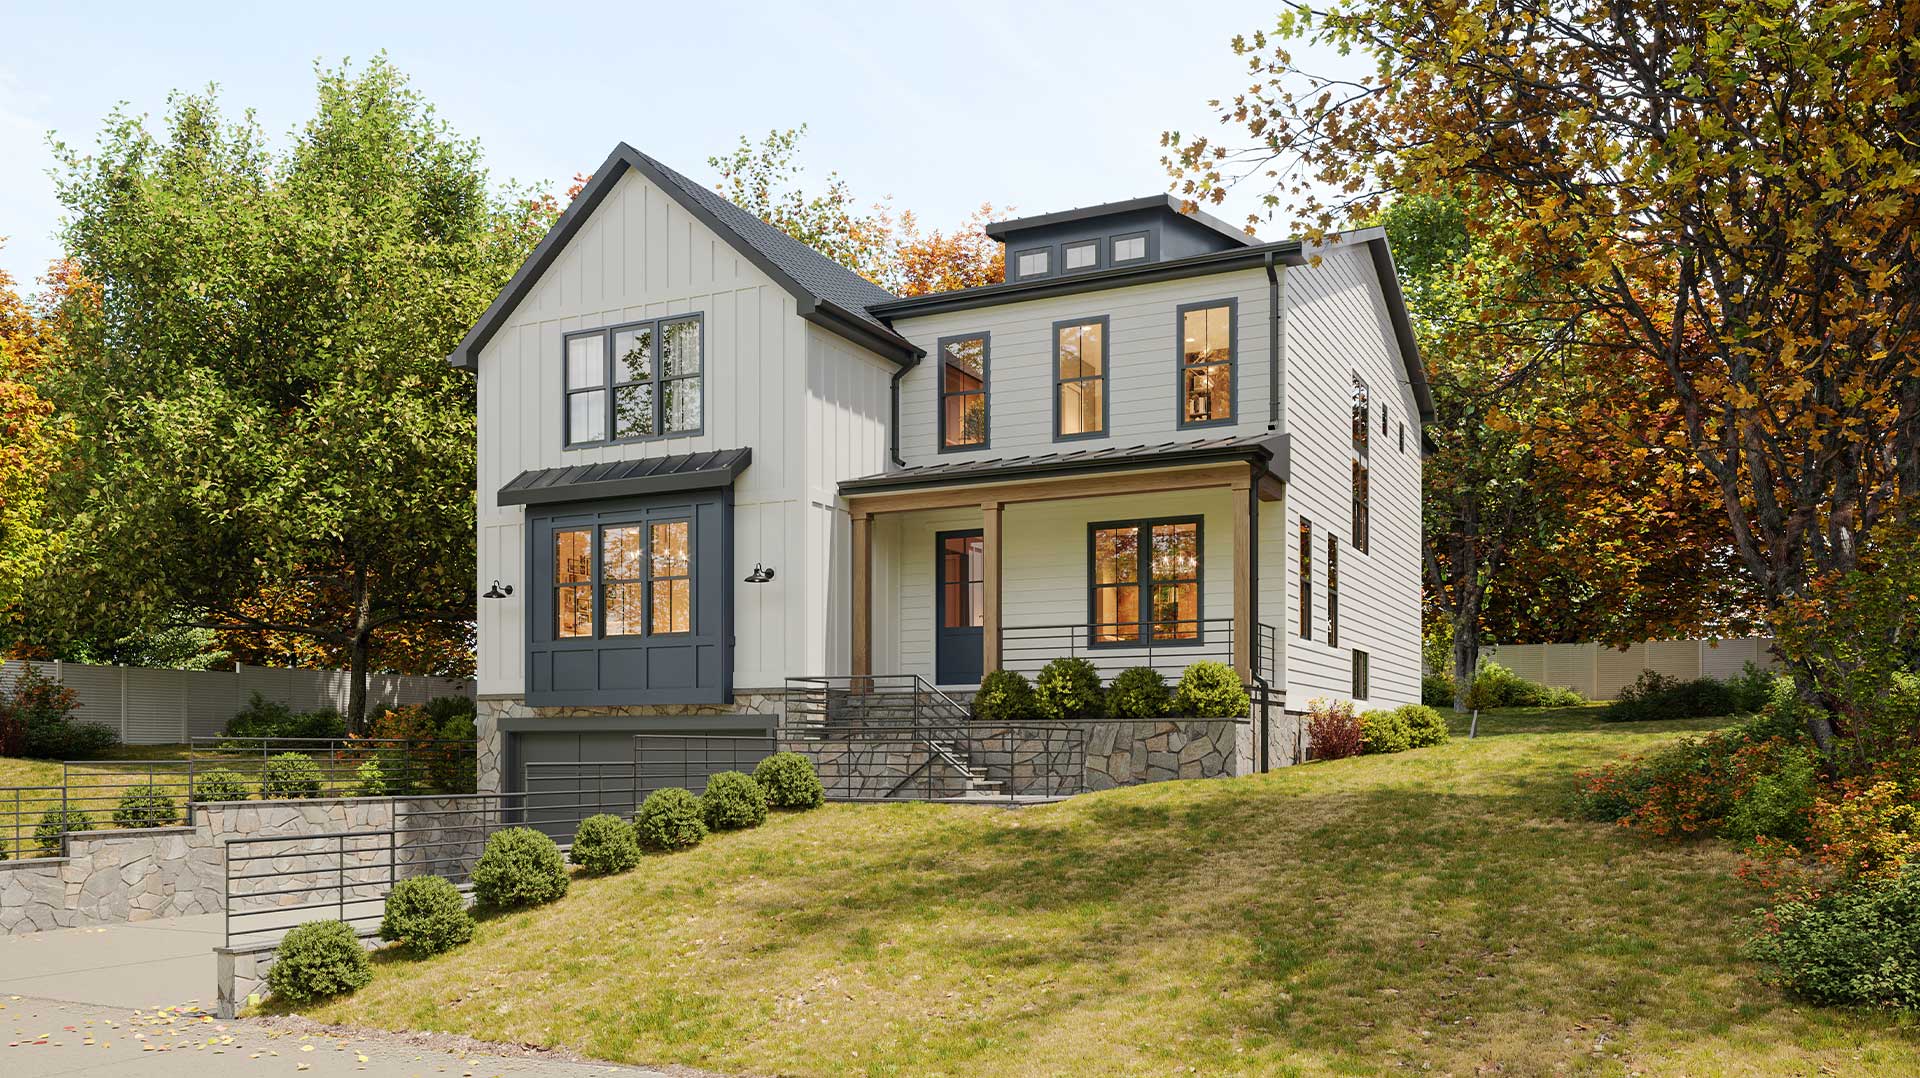 A modern farmhouse with drive under garage, white with dark windows and dark blue accents including window assembly and front door.